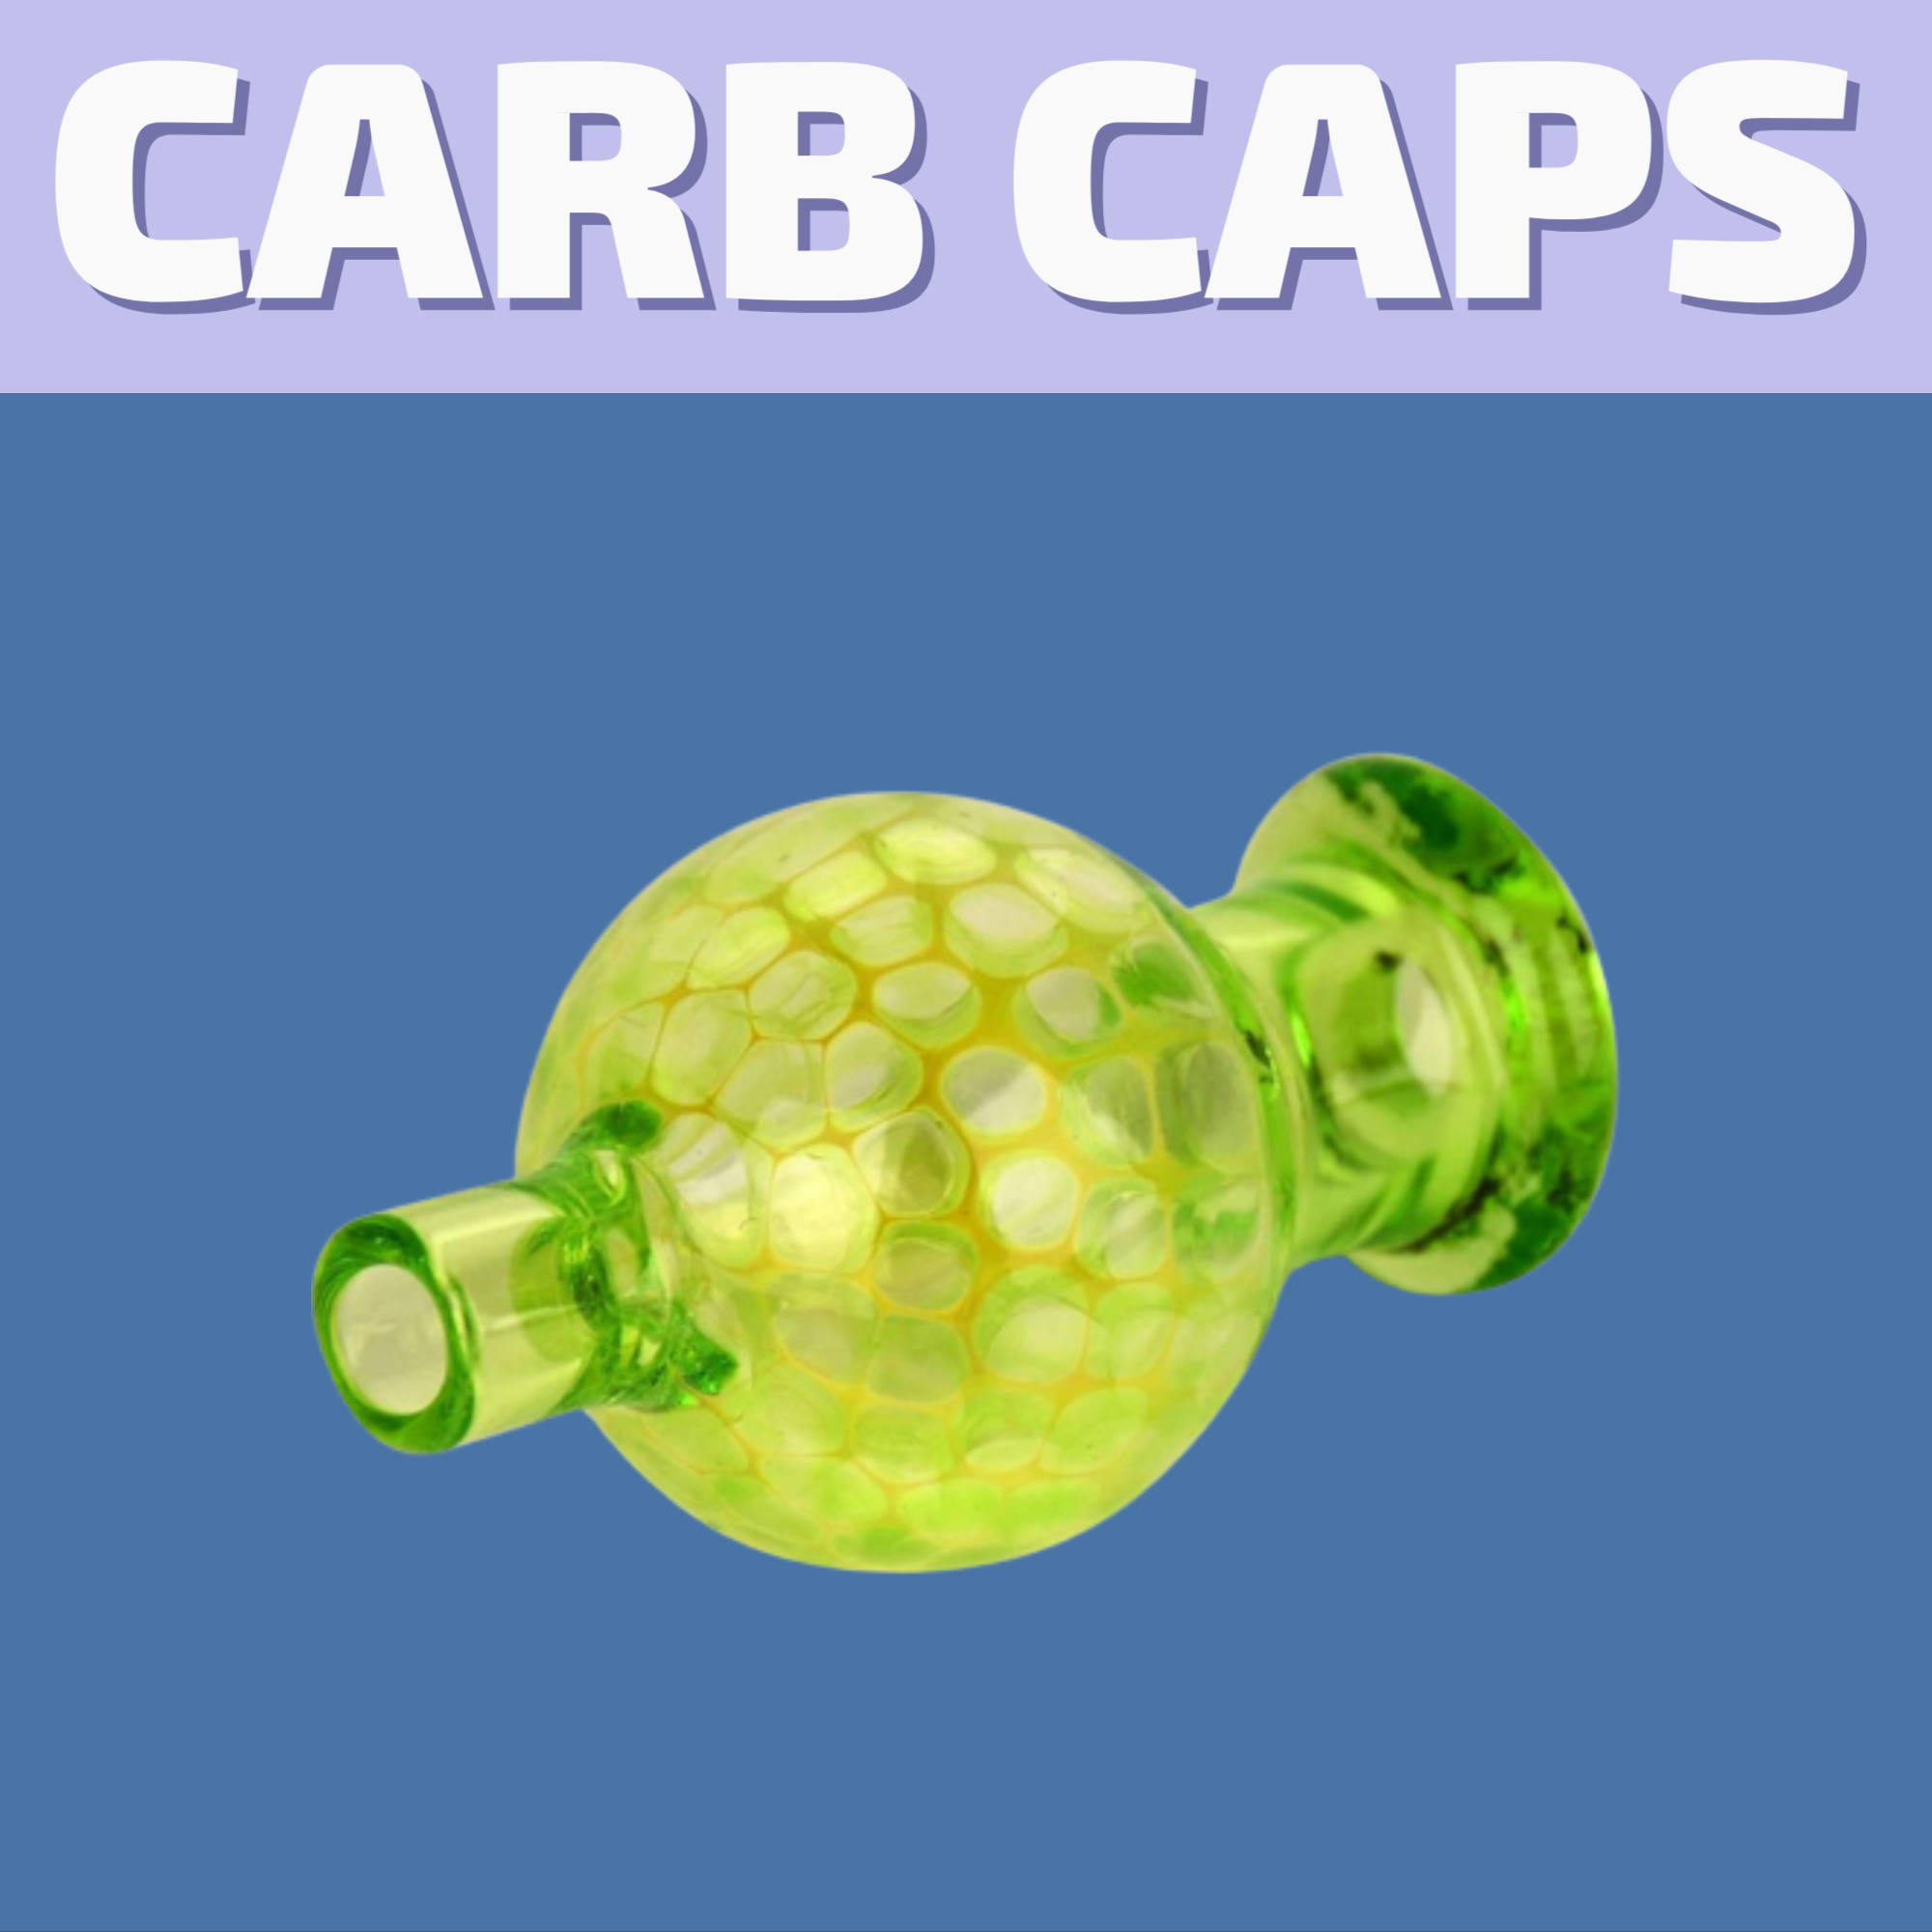 Buy Carb Caps and Quartz Bangers online for same day delivery in Winnipeg or visit our dispensary on 580 Academy Road. 